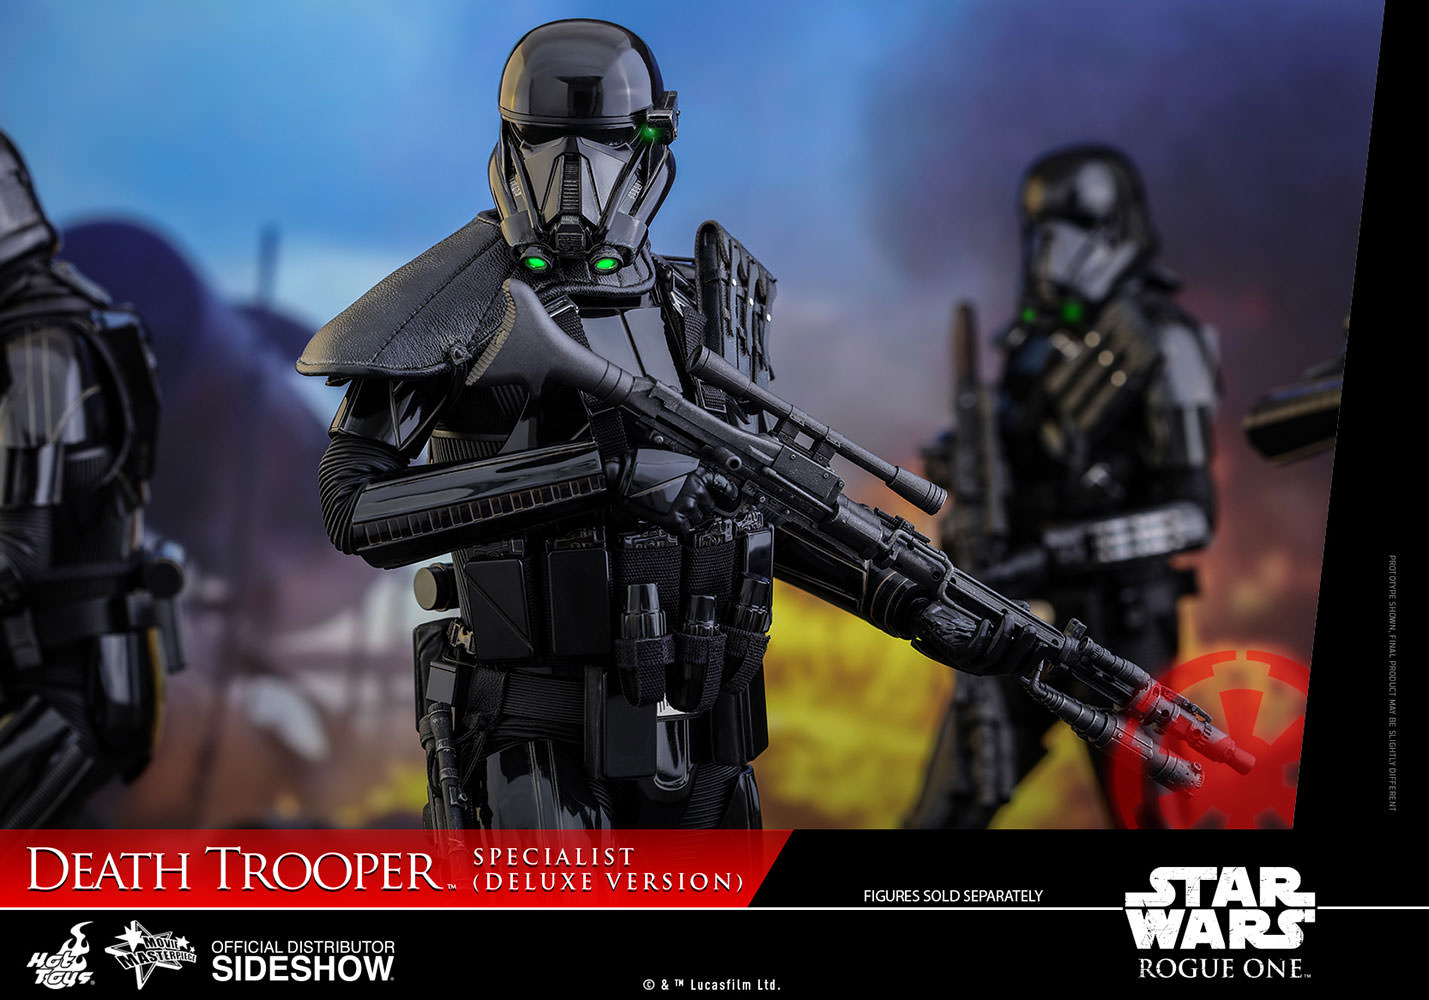 star-wars-rogue-one-death-trooper-specialist-deluxe-version-hot-toys-feature-HT-product-902906-12.jpg